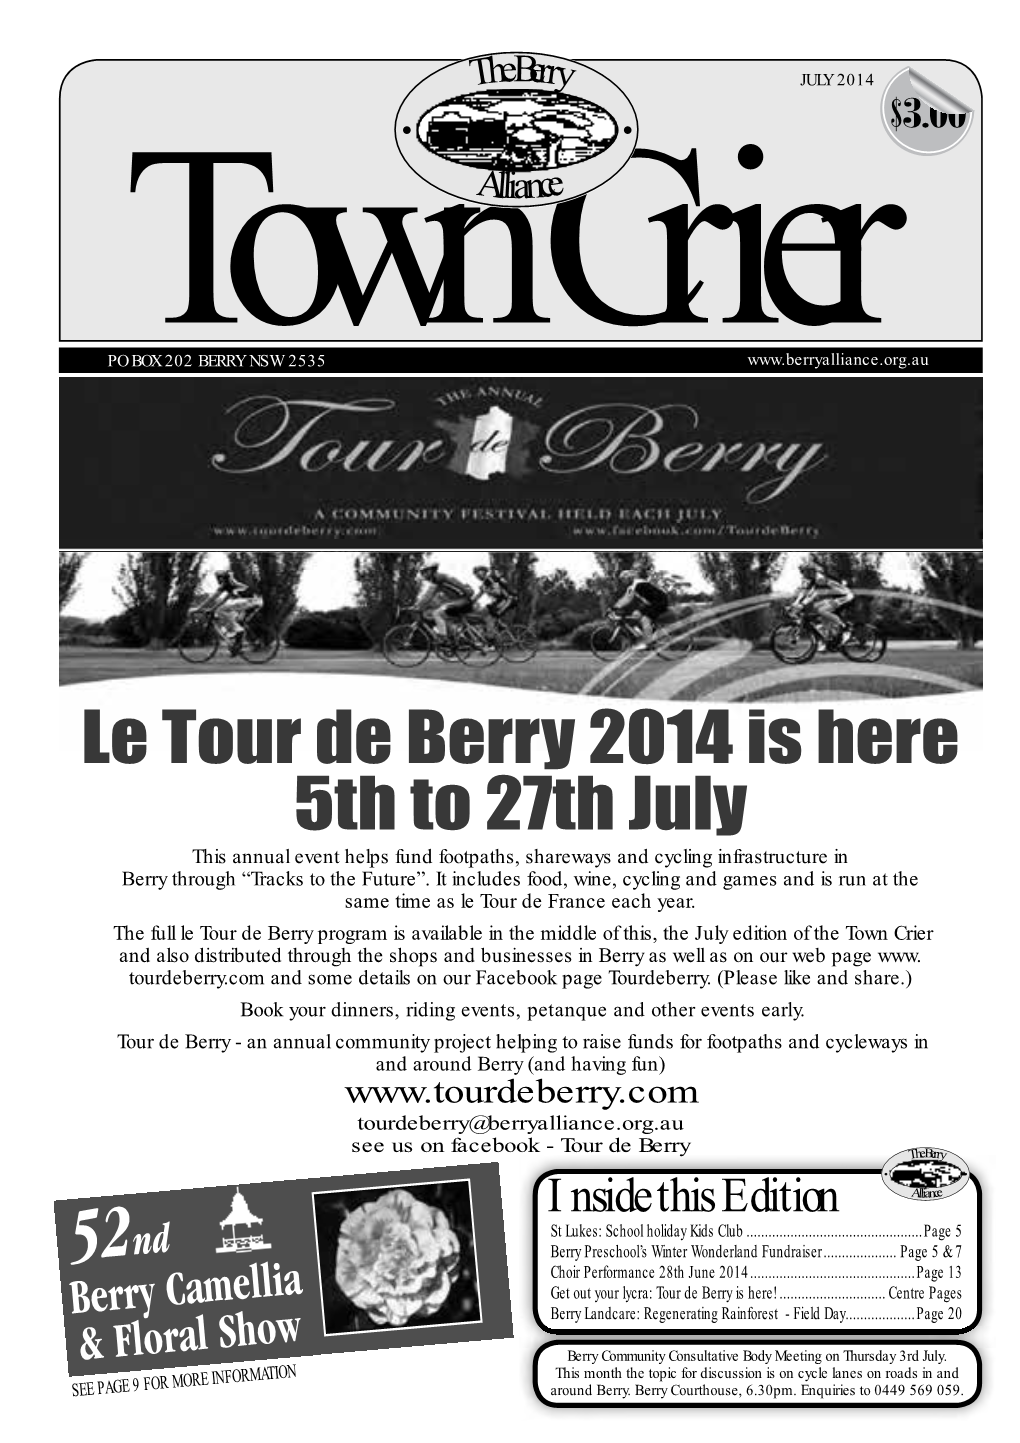 Le Tour De Berry 2014 Is Here 5Th to 27Th July This Annual Event Helps Fund Footpaths, Shareways and Cycling Infrastructure in Berry Through “Tracks to the Future”